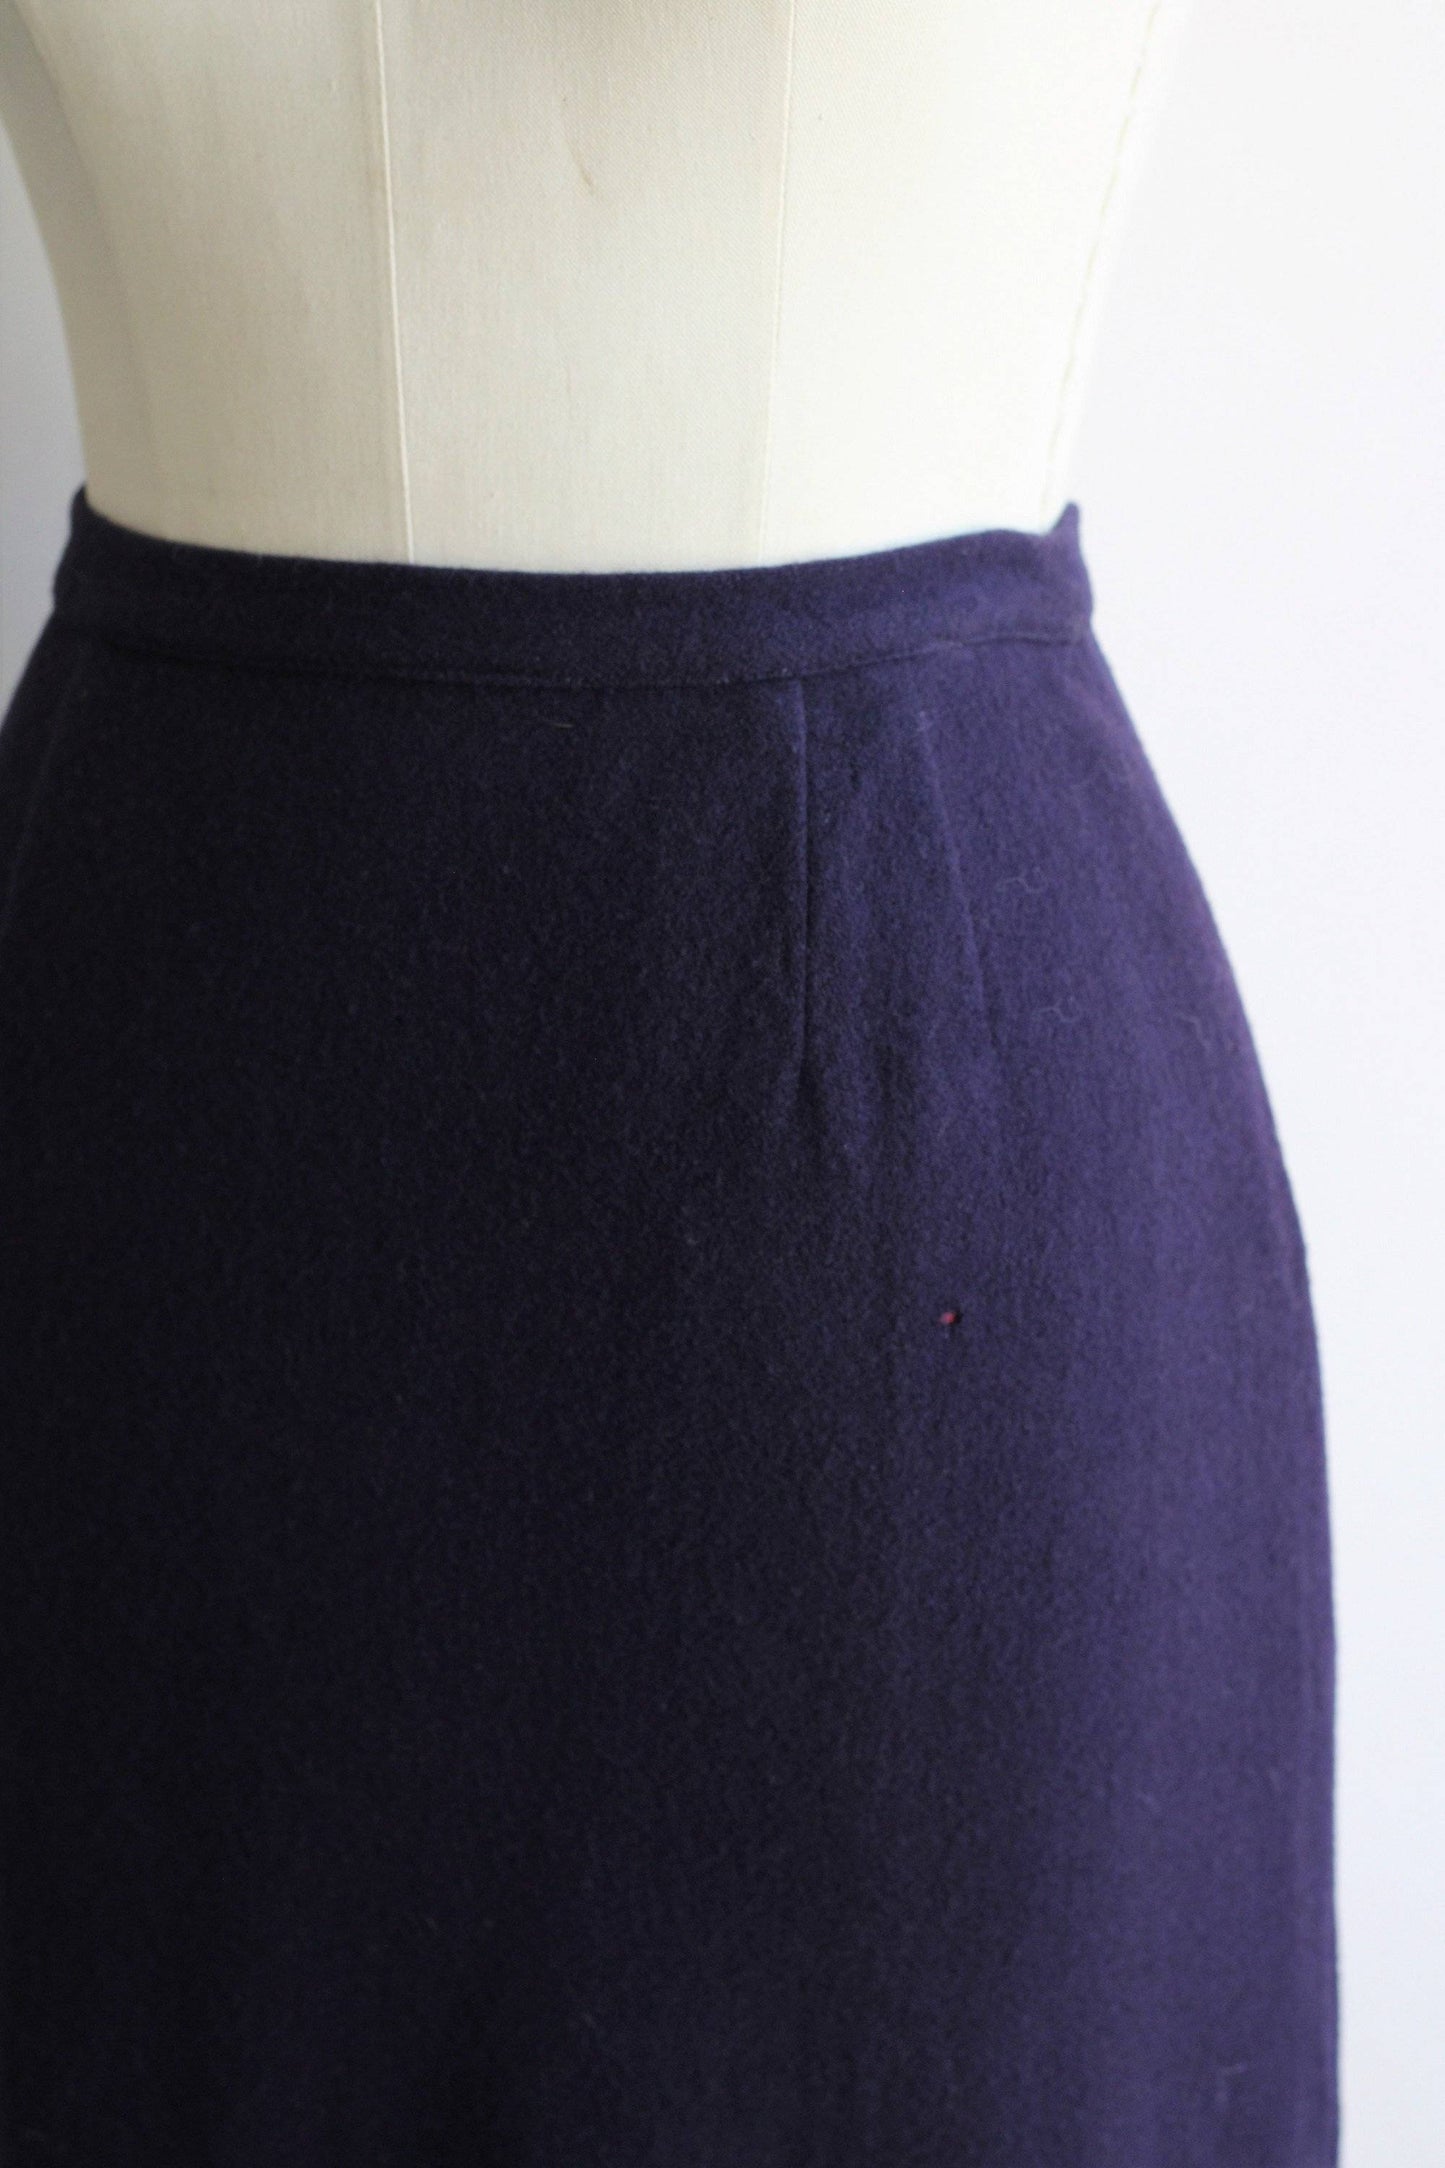 Vintage 1960s Navy Blue Wool Skirt, Campus Casuals-Toadstool Farm Vintage-1960s,1960s 1950s,campus casuals,navy blue,pencil skirt,skirt,Vintage,Vintage Clothing,wiggle